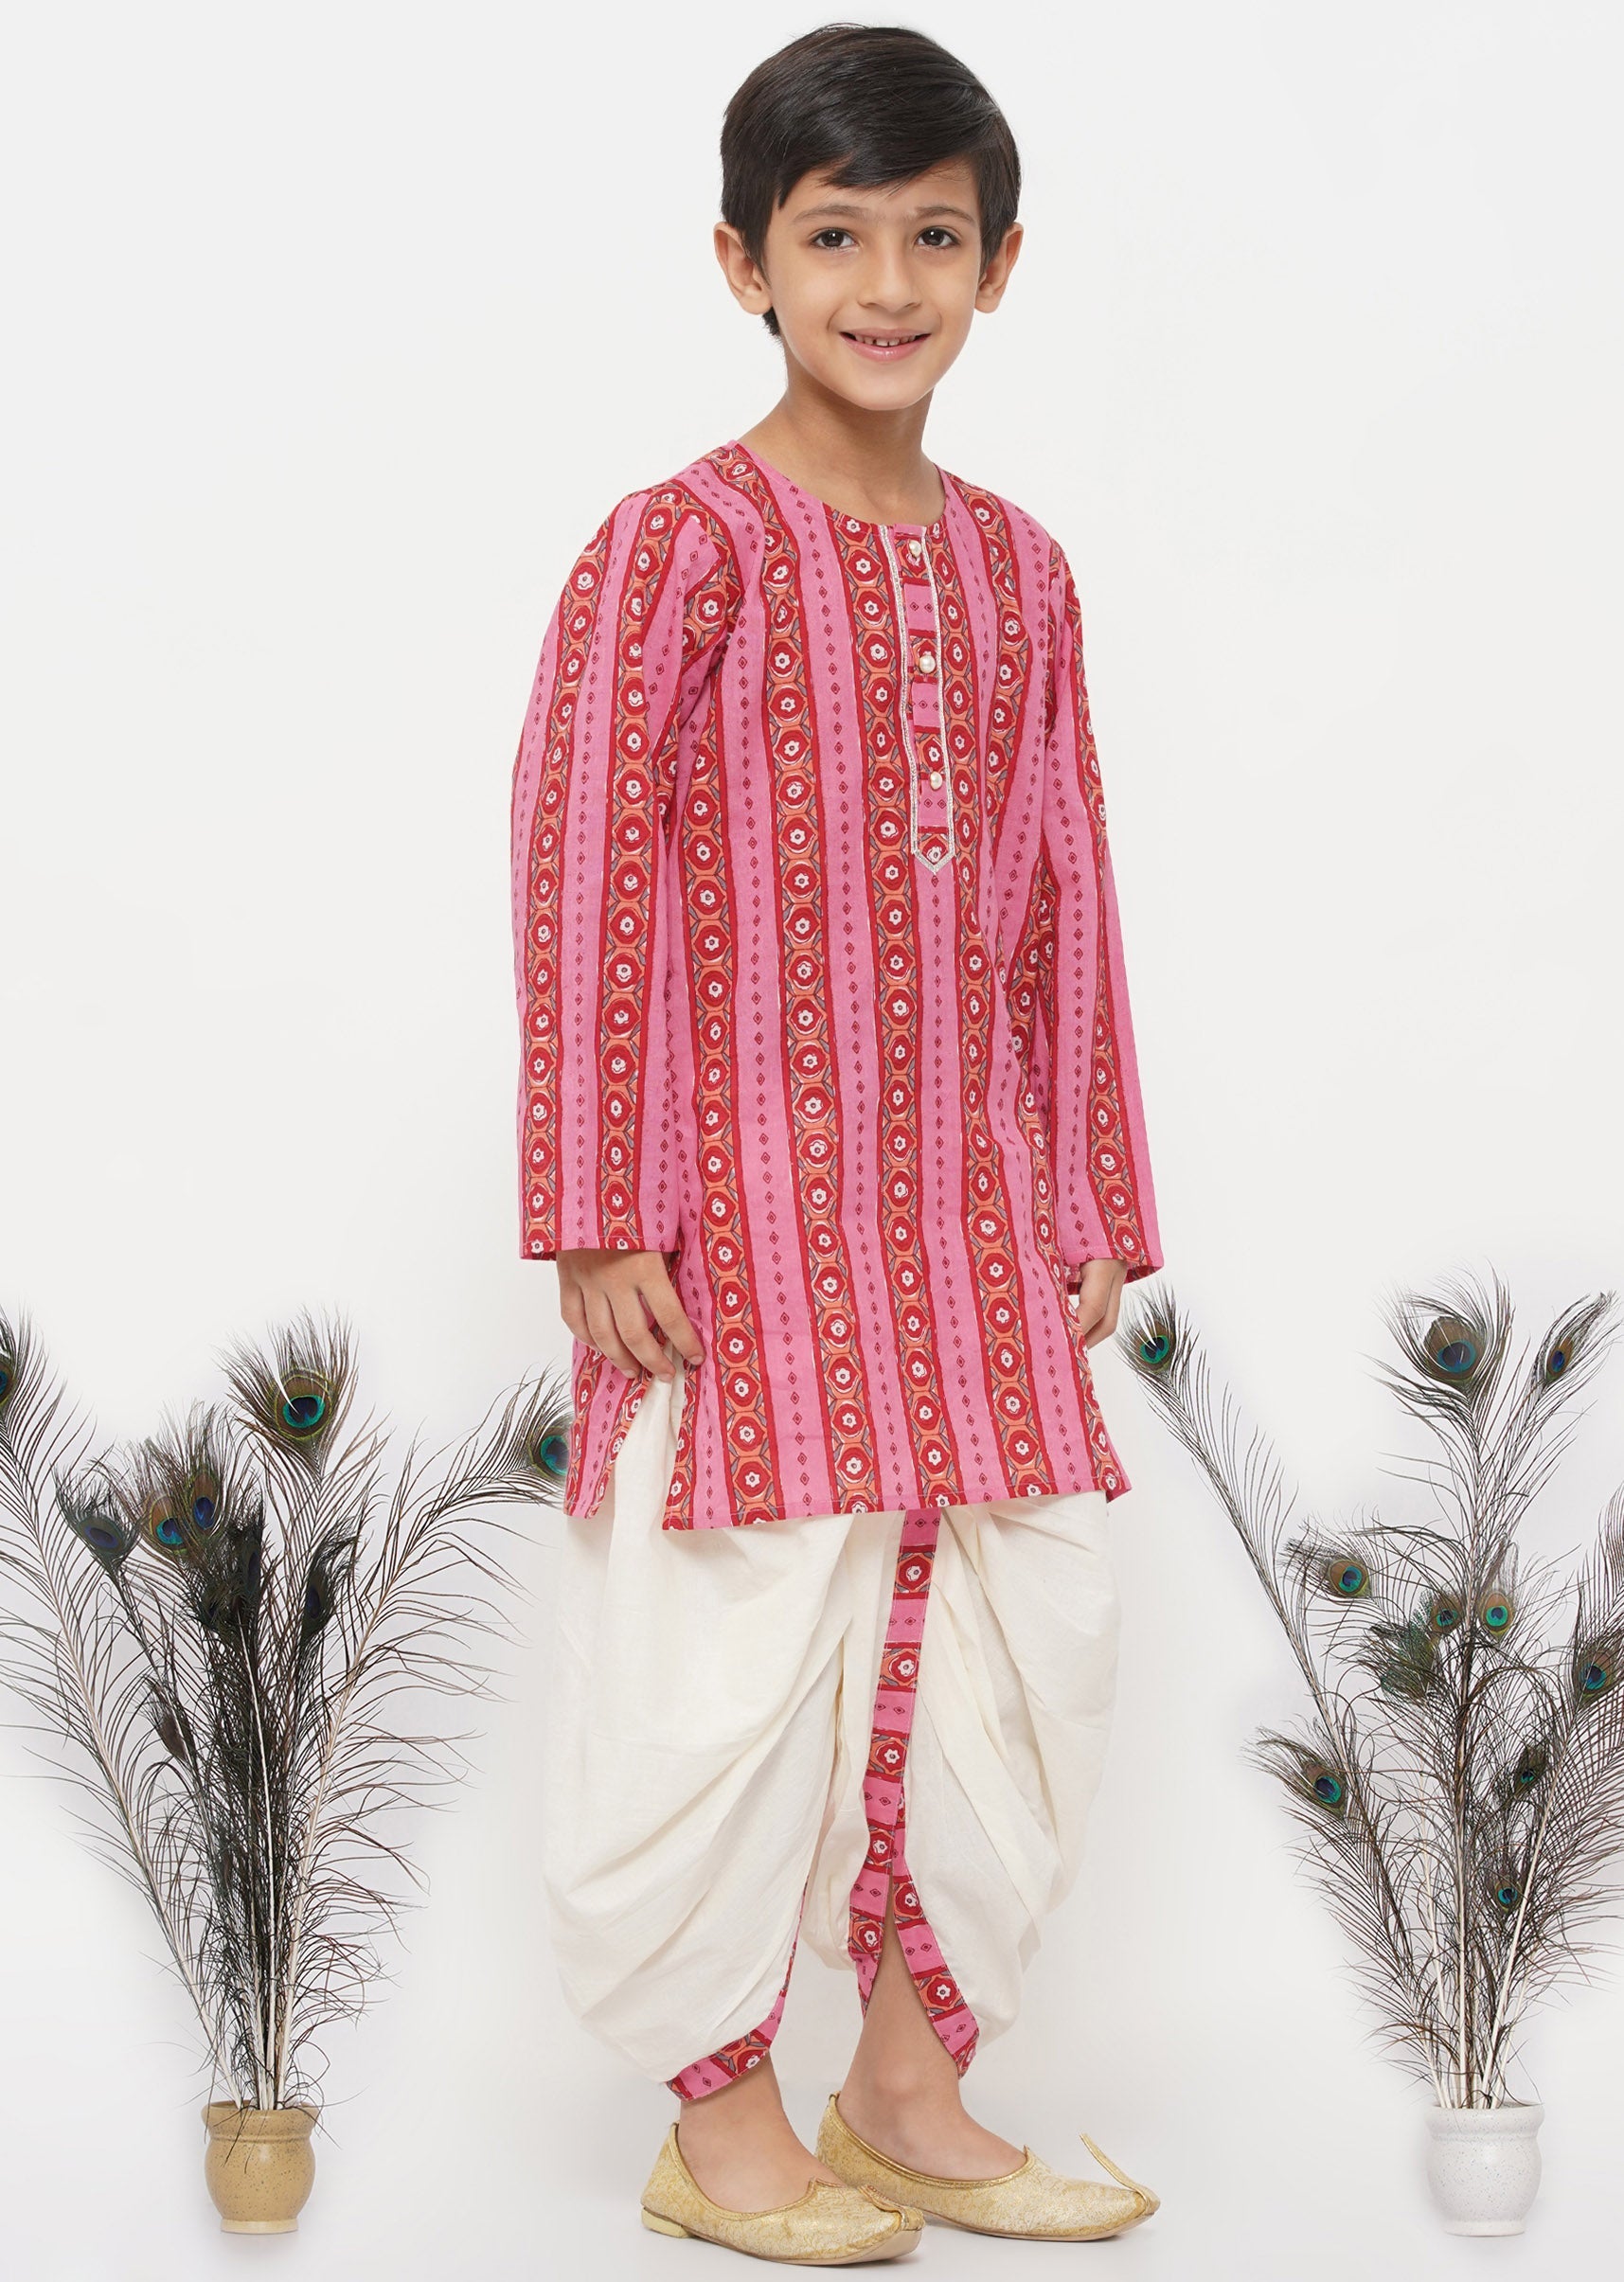 Boy's Cotton Striped Jaipuri Kurta With Pearl Buttons And Dhoti -Pink And Cream - Little Bansi Boys